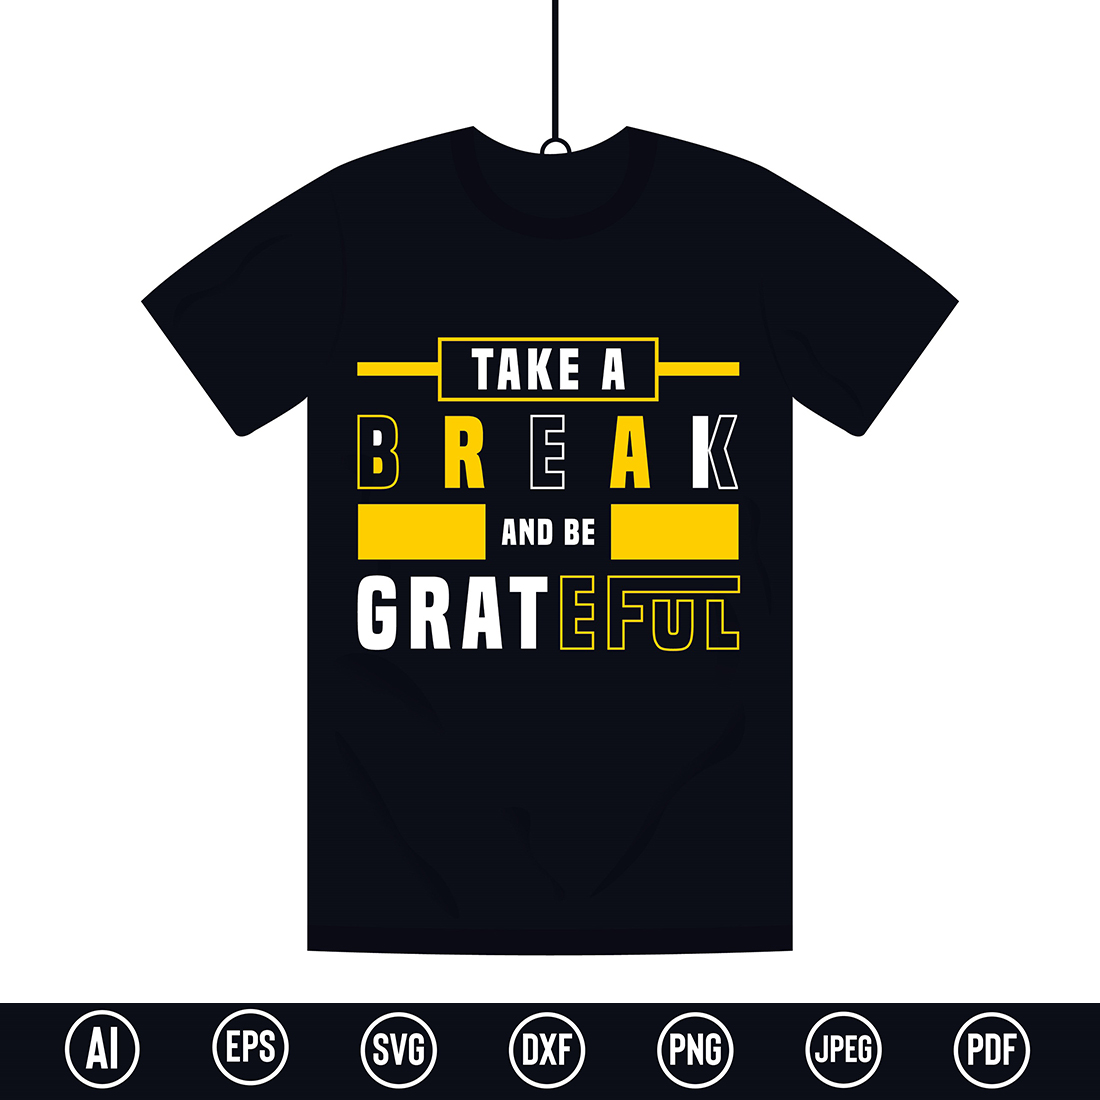 Modern T-Shirt design with “Take a break and be grateful” quote for t-shirt, posters, stickers, mug prints, banners, gift cards, labels etc cover image.